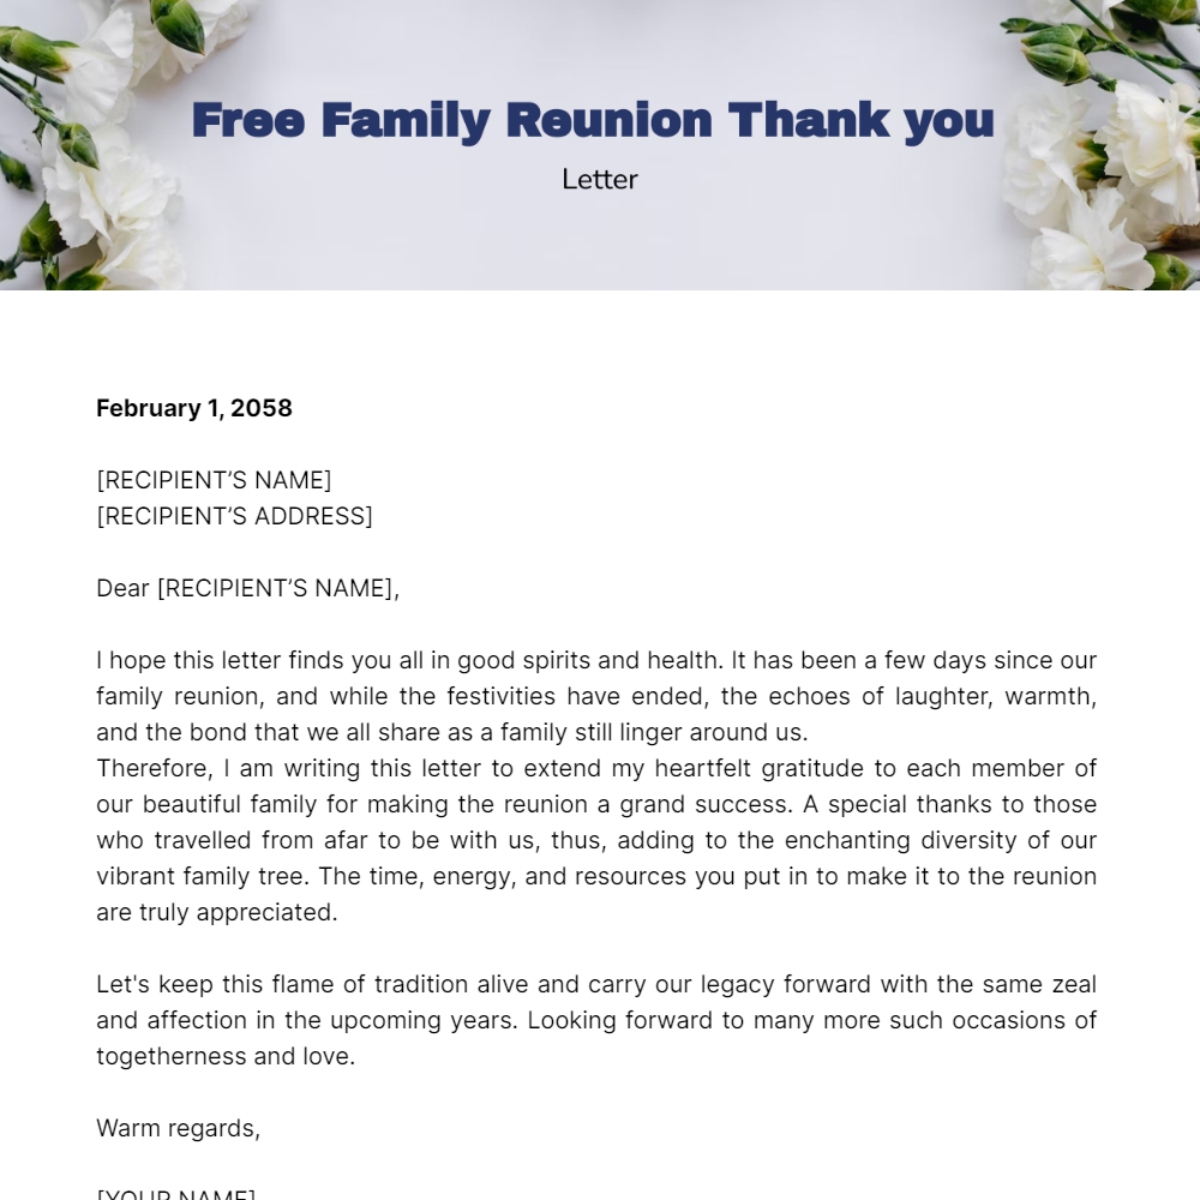 Family Reunion Thank you Letter Template